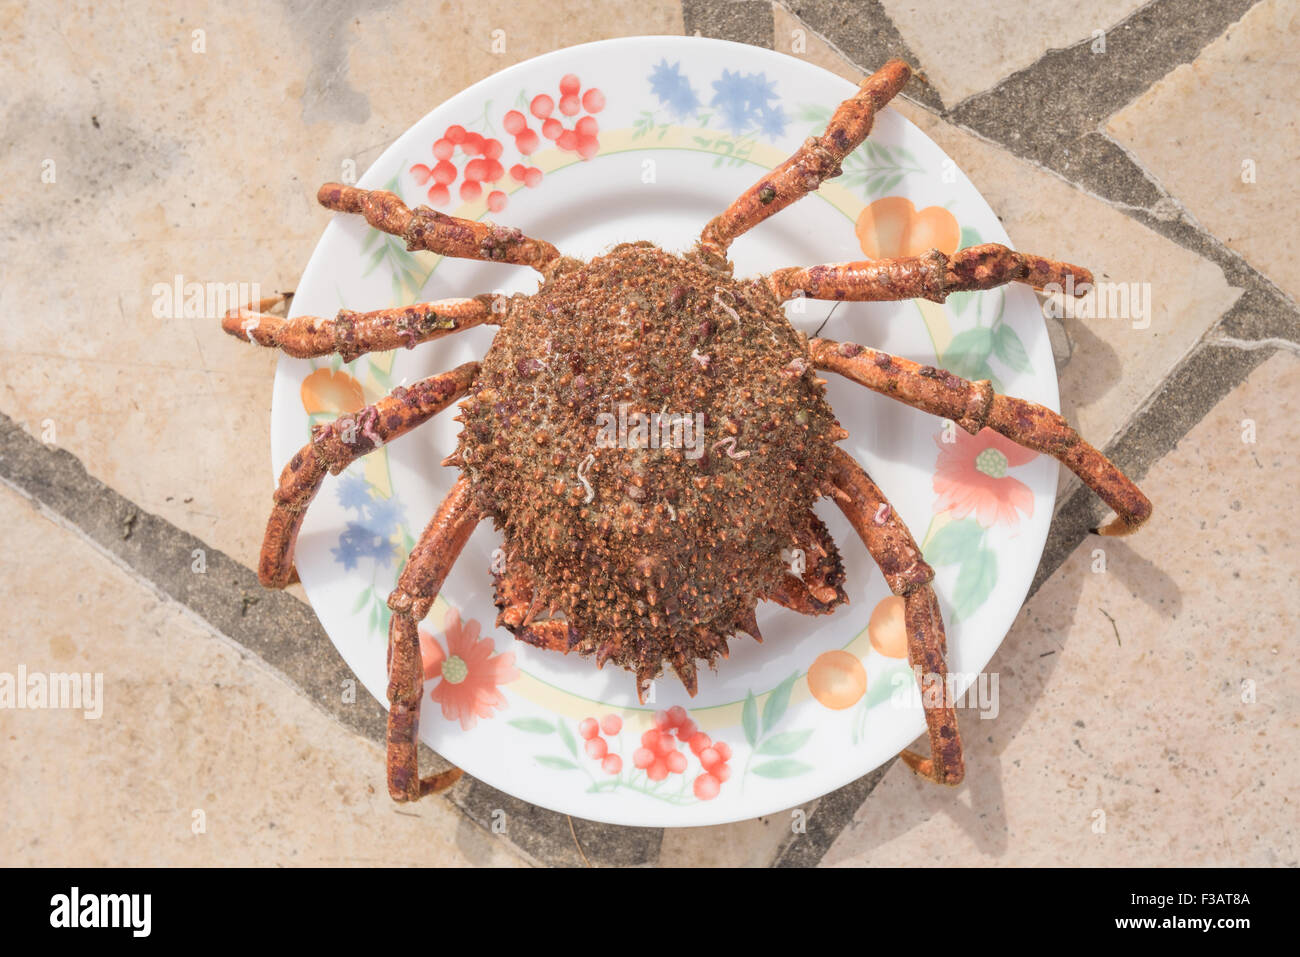 Red maja squinado spider crab in a plate Stock Photo